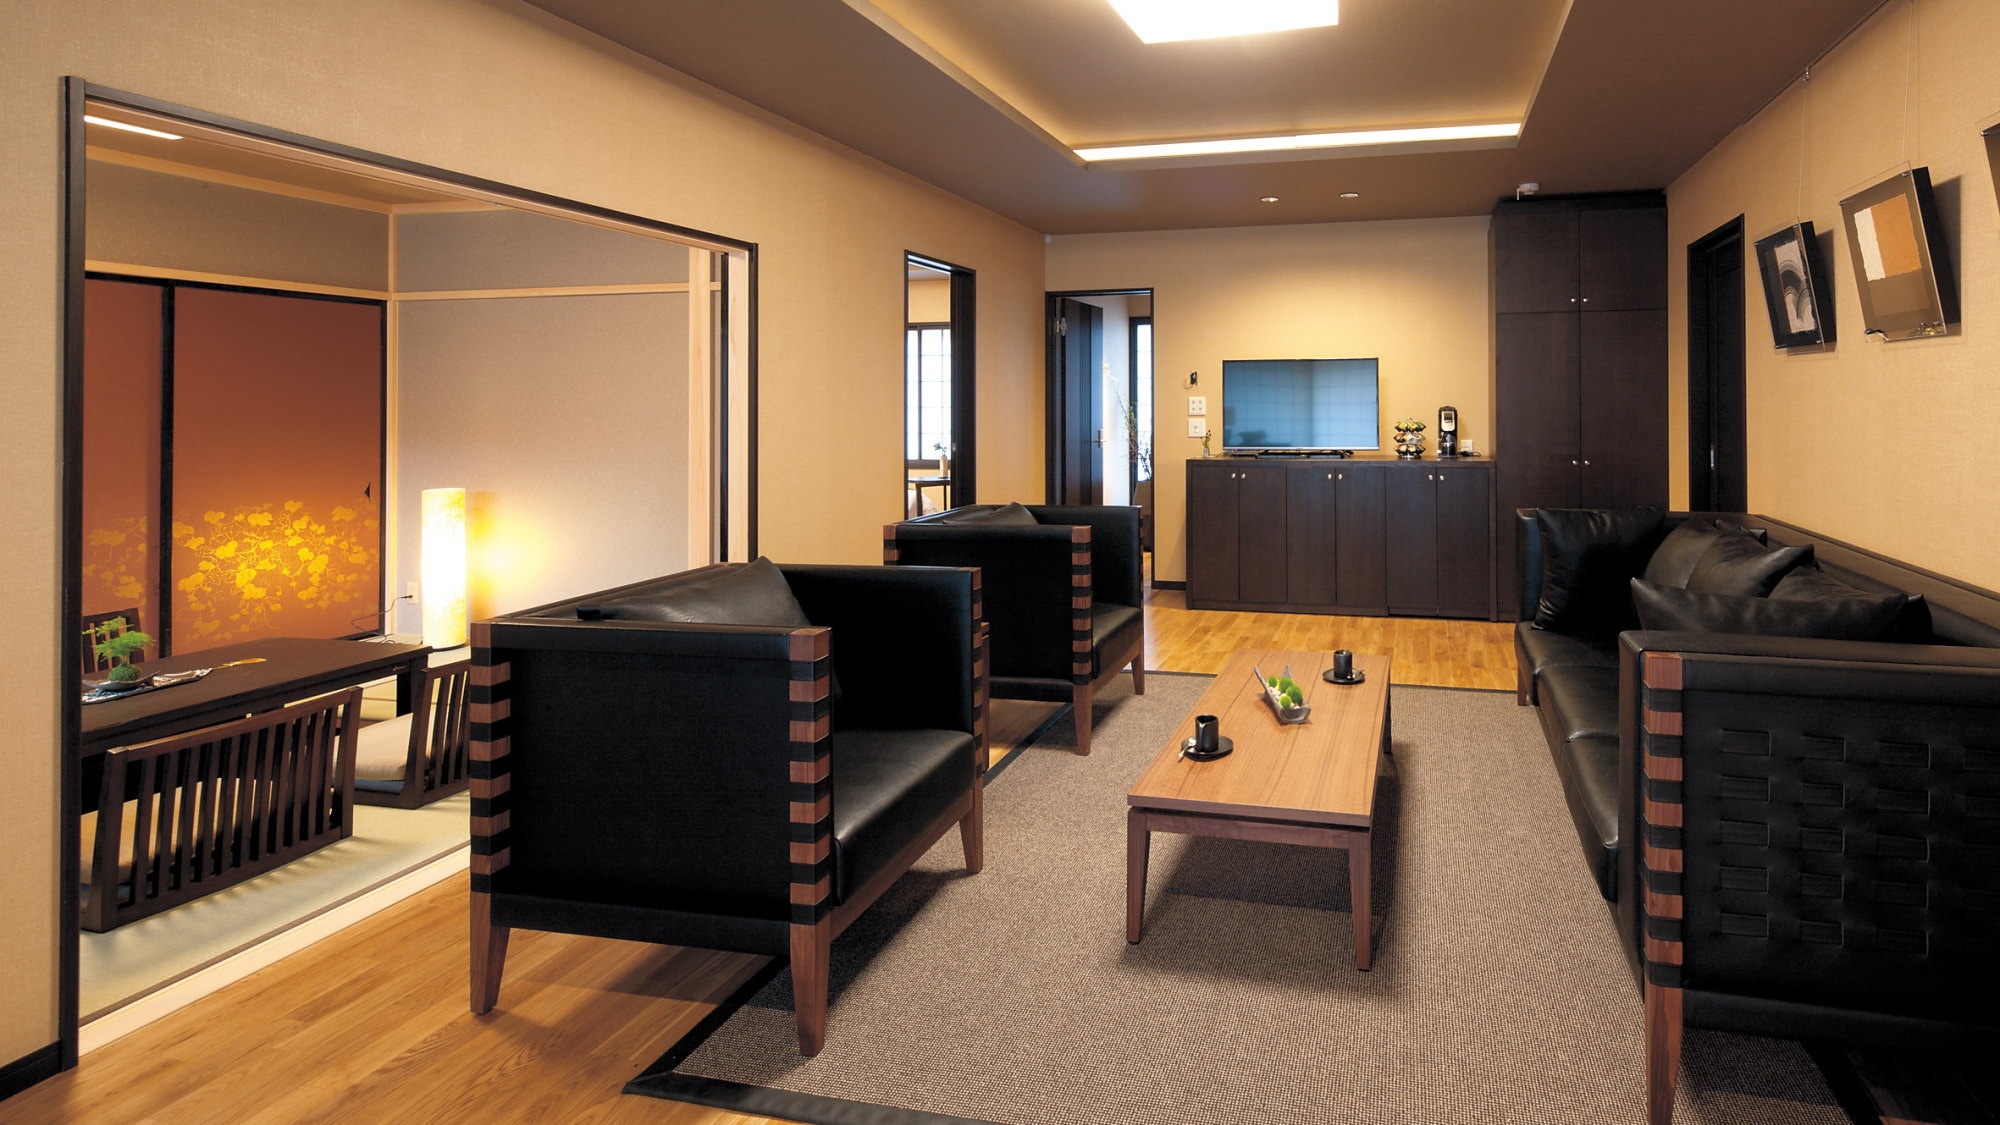 Both Japanese-style and Western-style rooms are spacious.